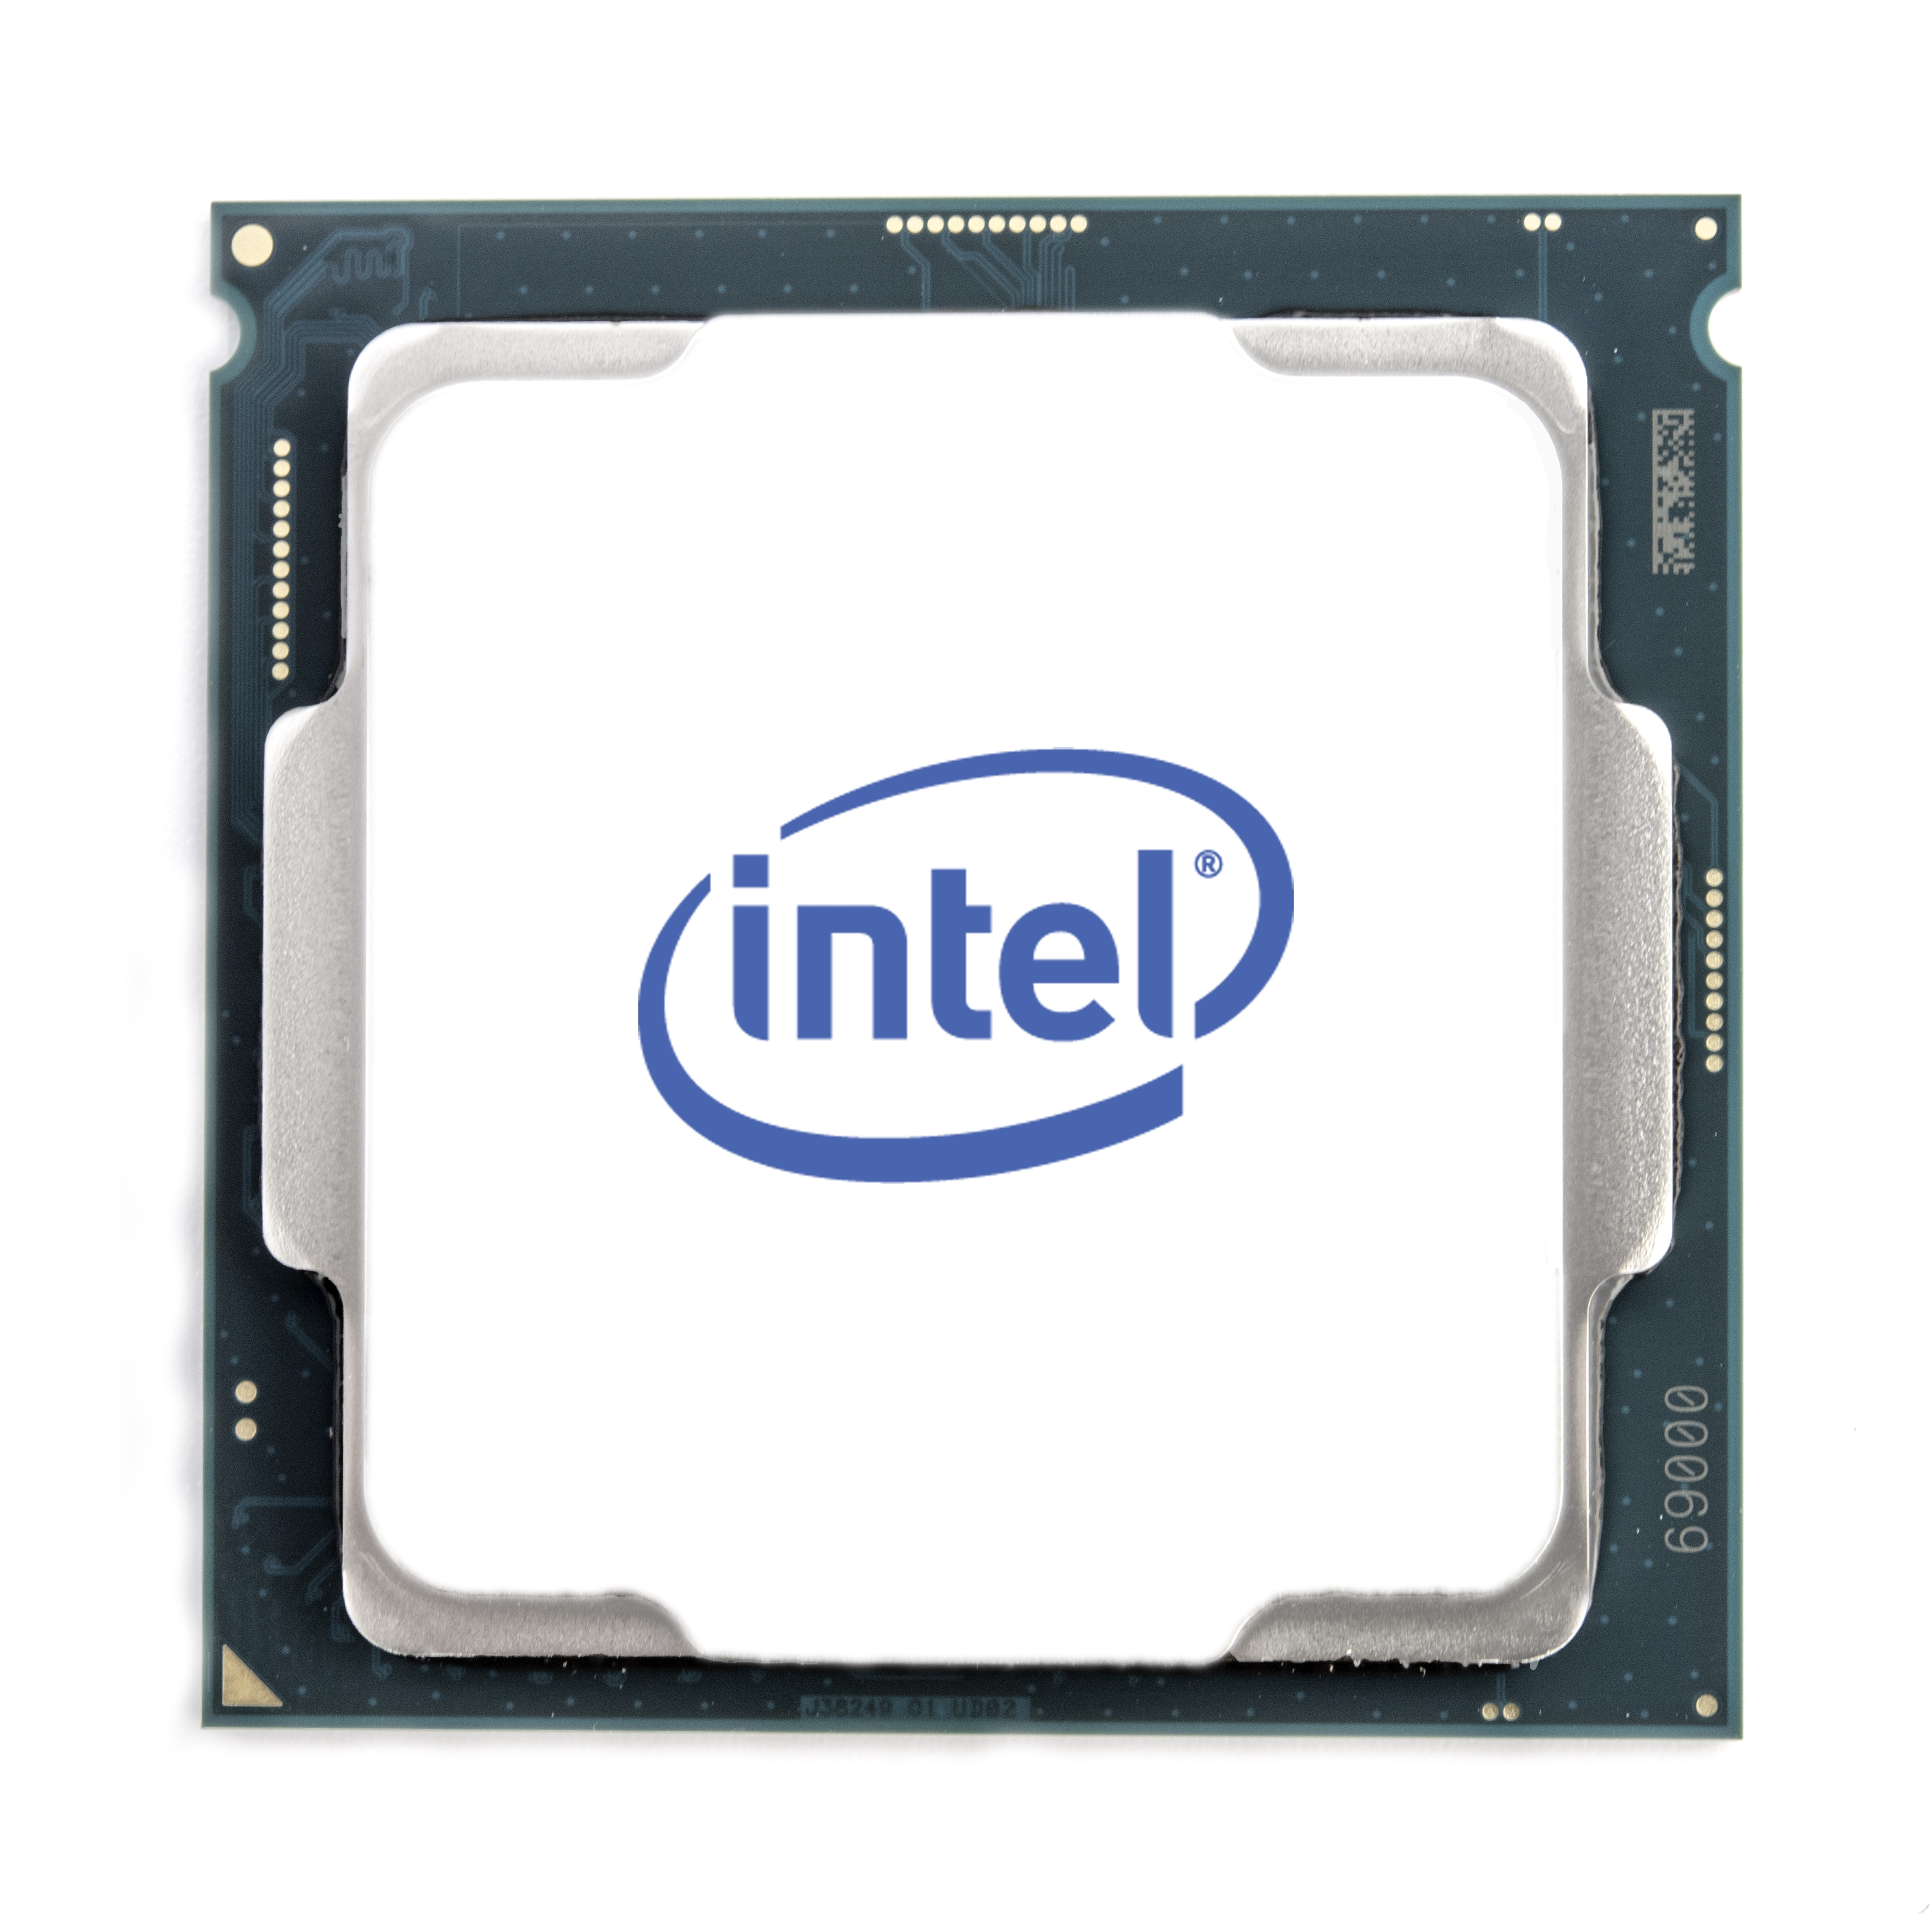 8TH GEN INTEL CORE I5-8600 PROCESSOR (6 CORES, UP TO 4.3 GHZ, 9MB CACHE, 65W, TR